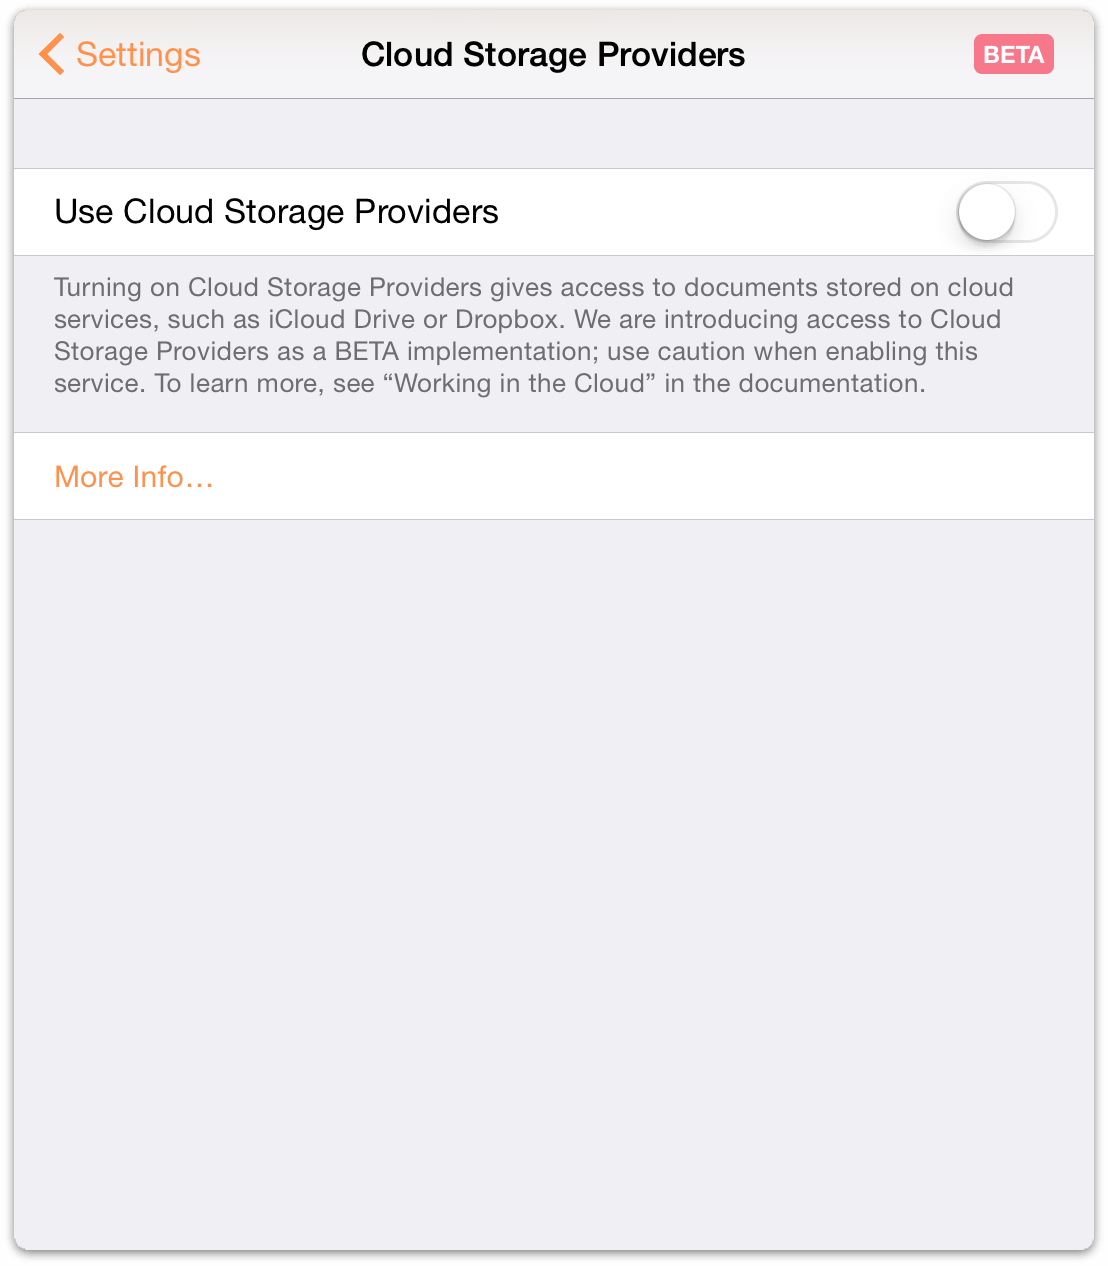 Read the text beneath the switch before turning on the Use Cloud Storage Providers option